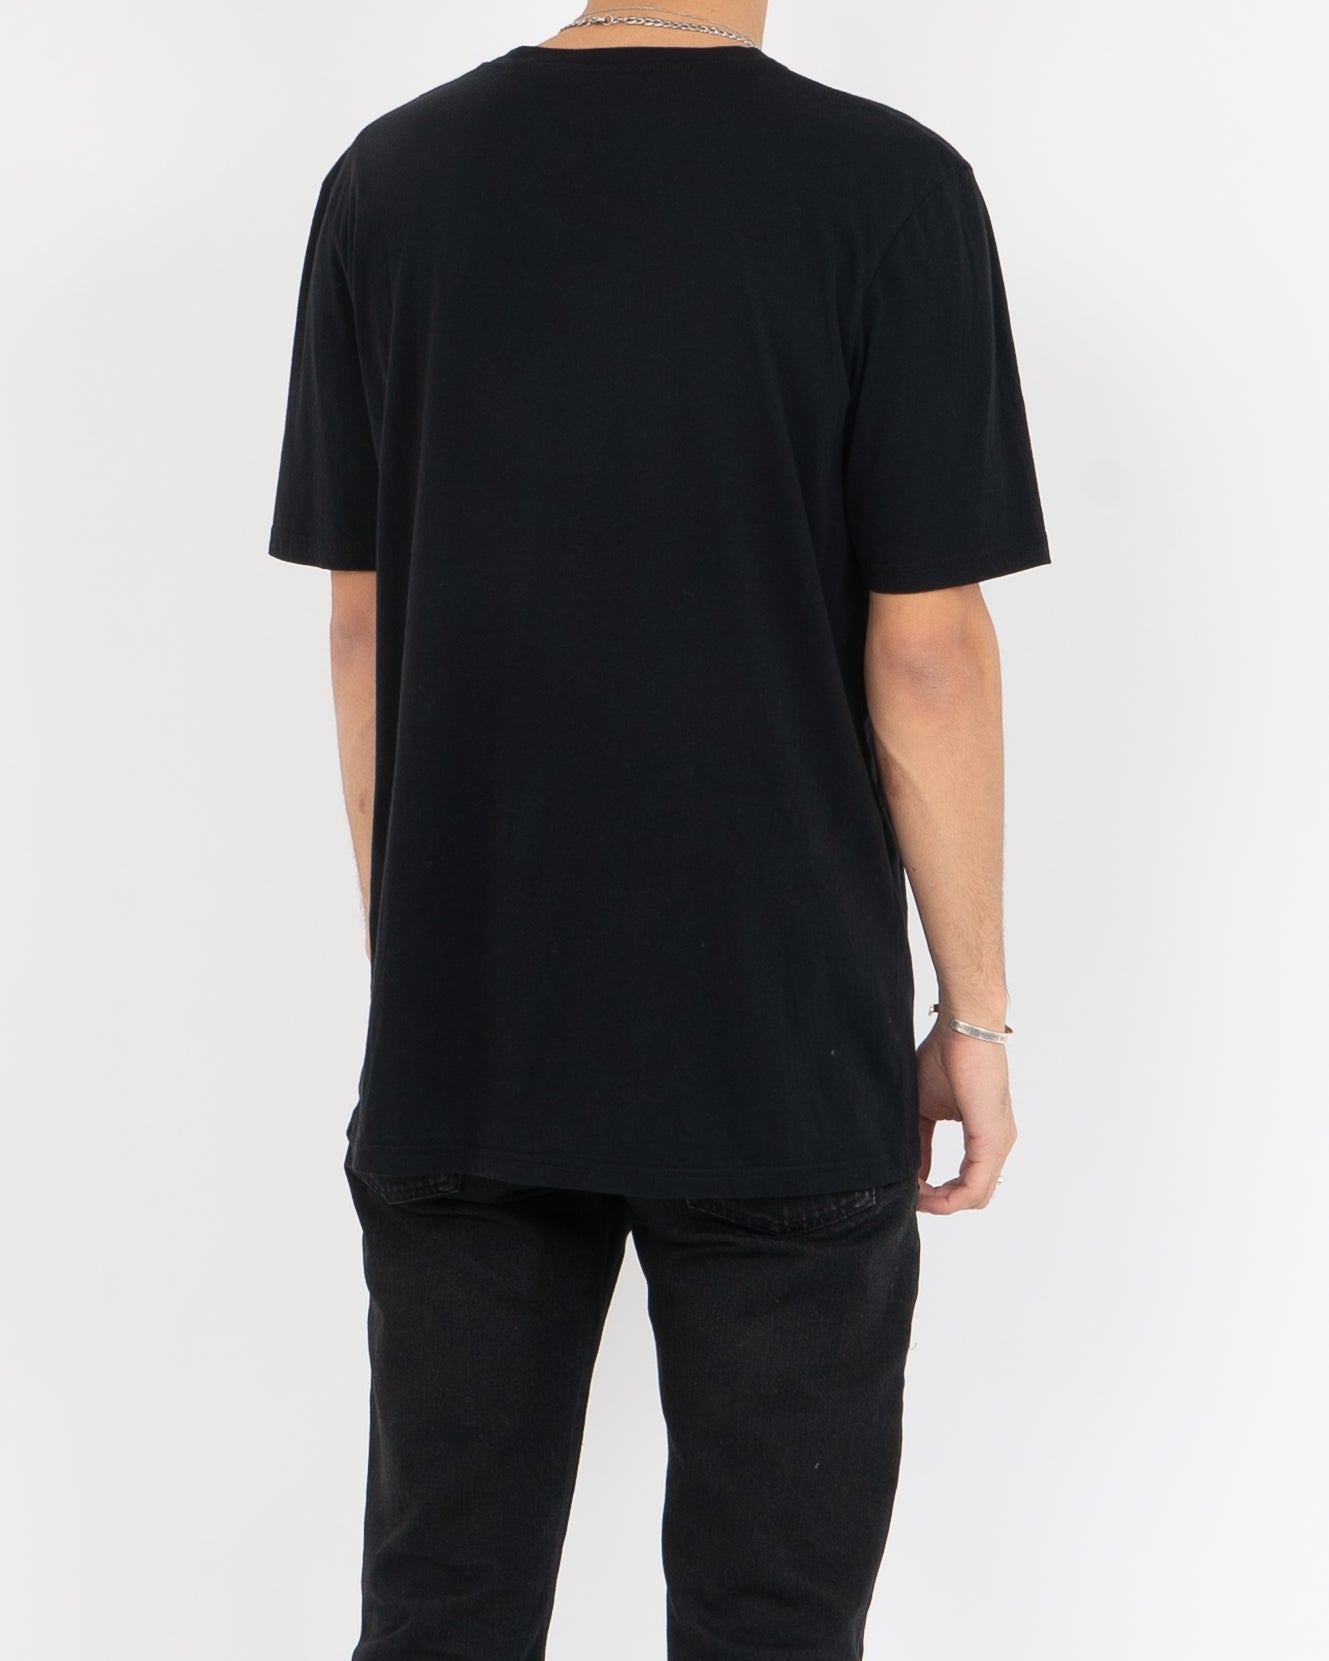 FW19 Unfortunate Coincidence T-Shirt